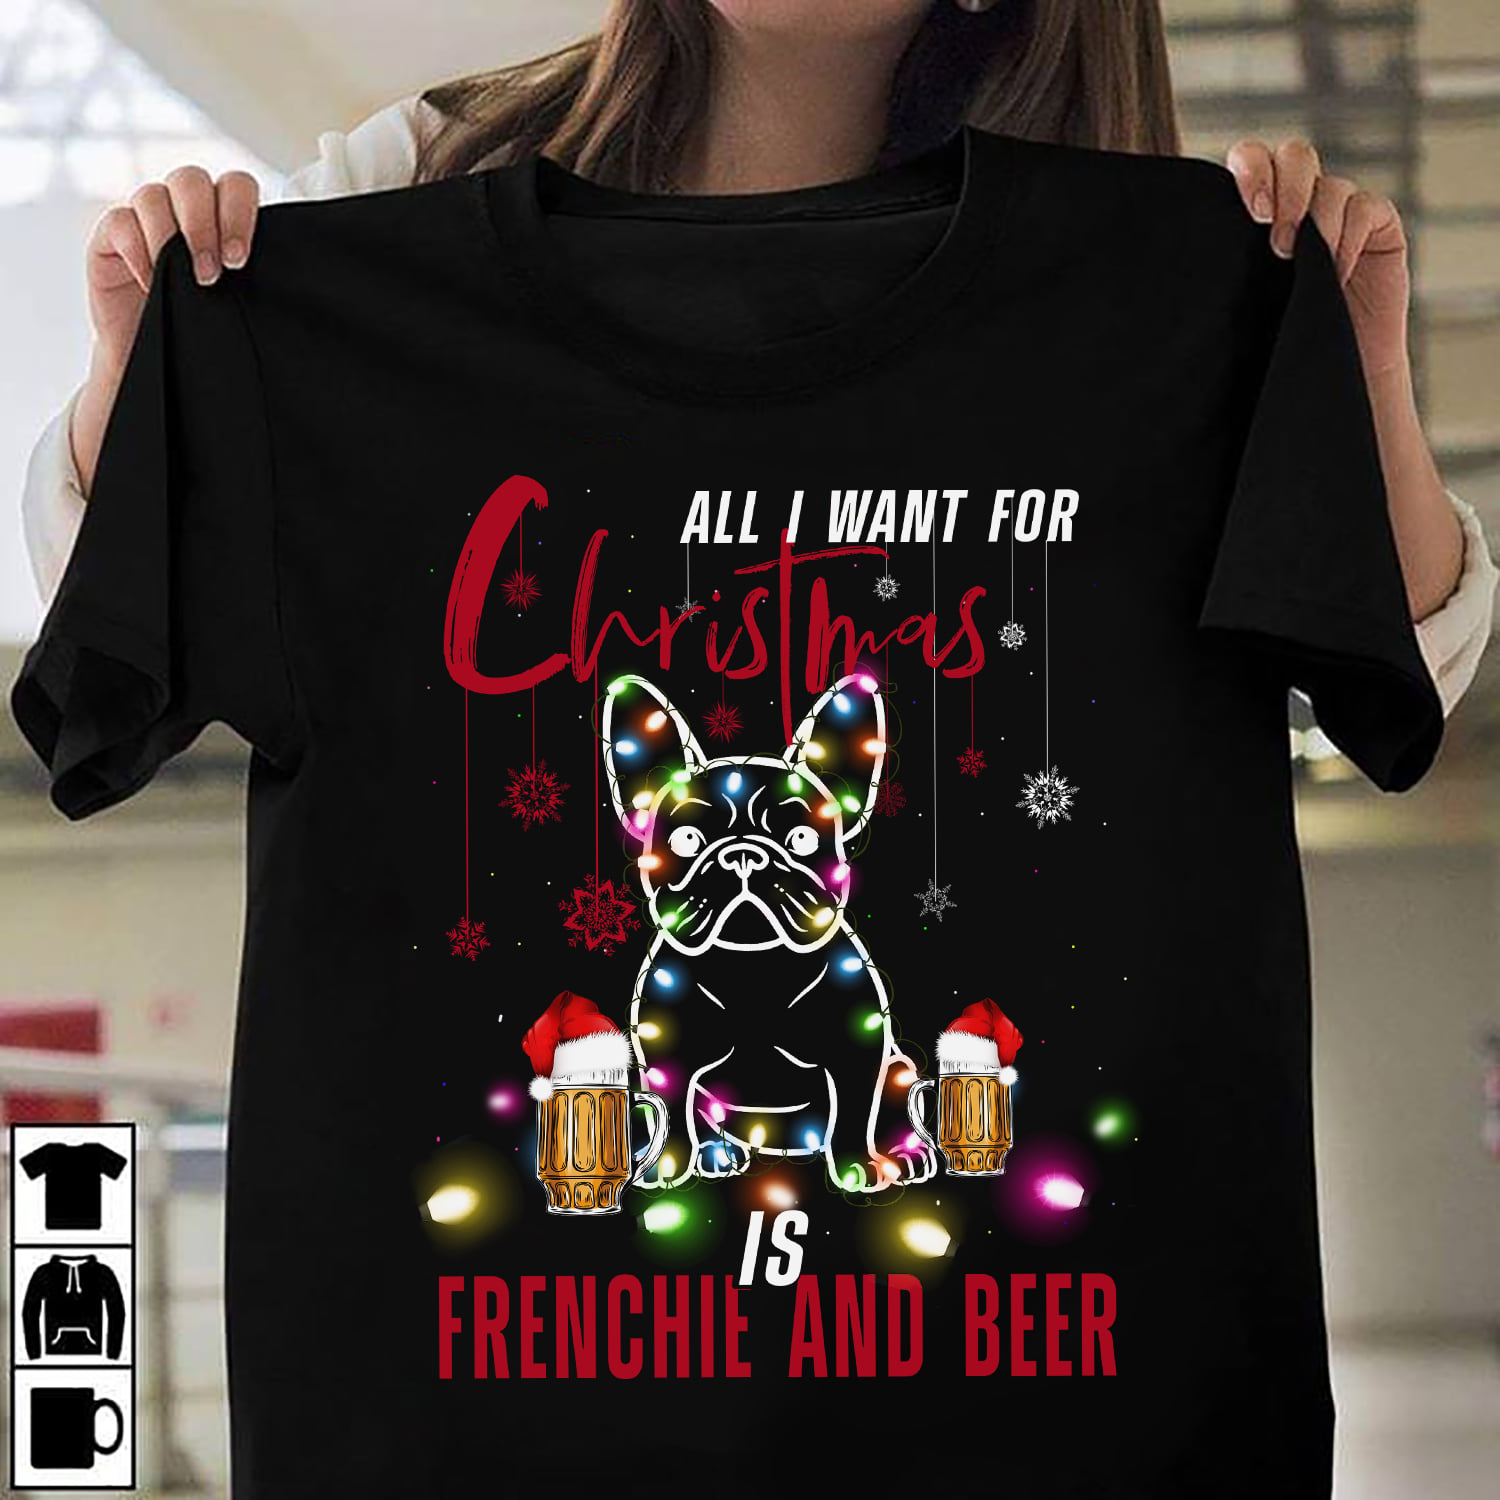 All I want for Christmas is Frenchie and beer - Beer for Christmas, Christmas day ugly sweater